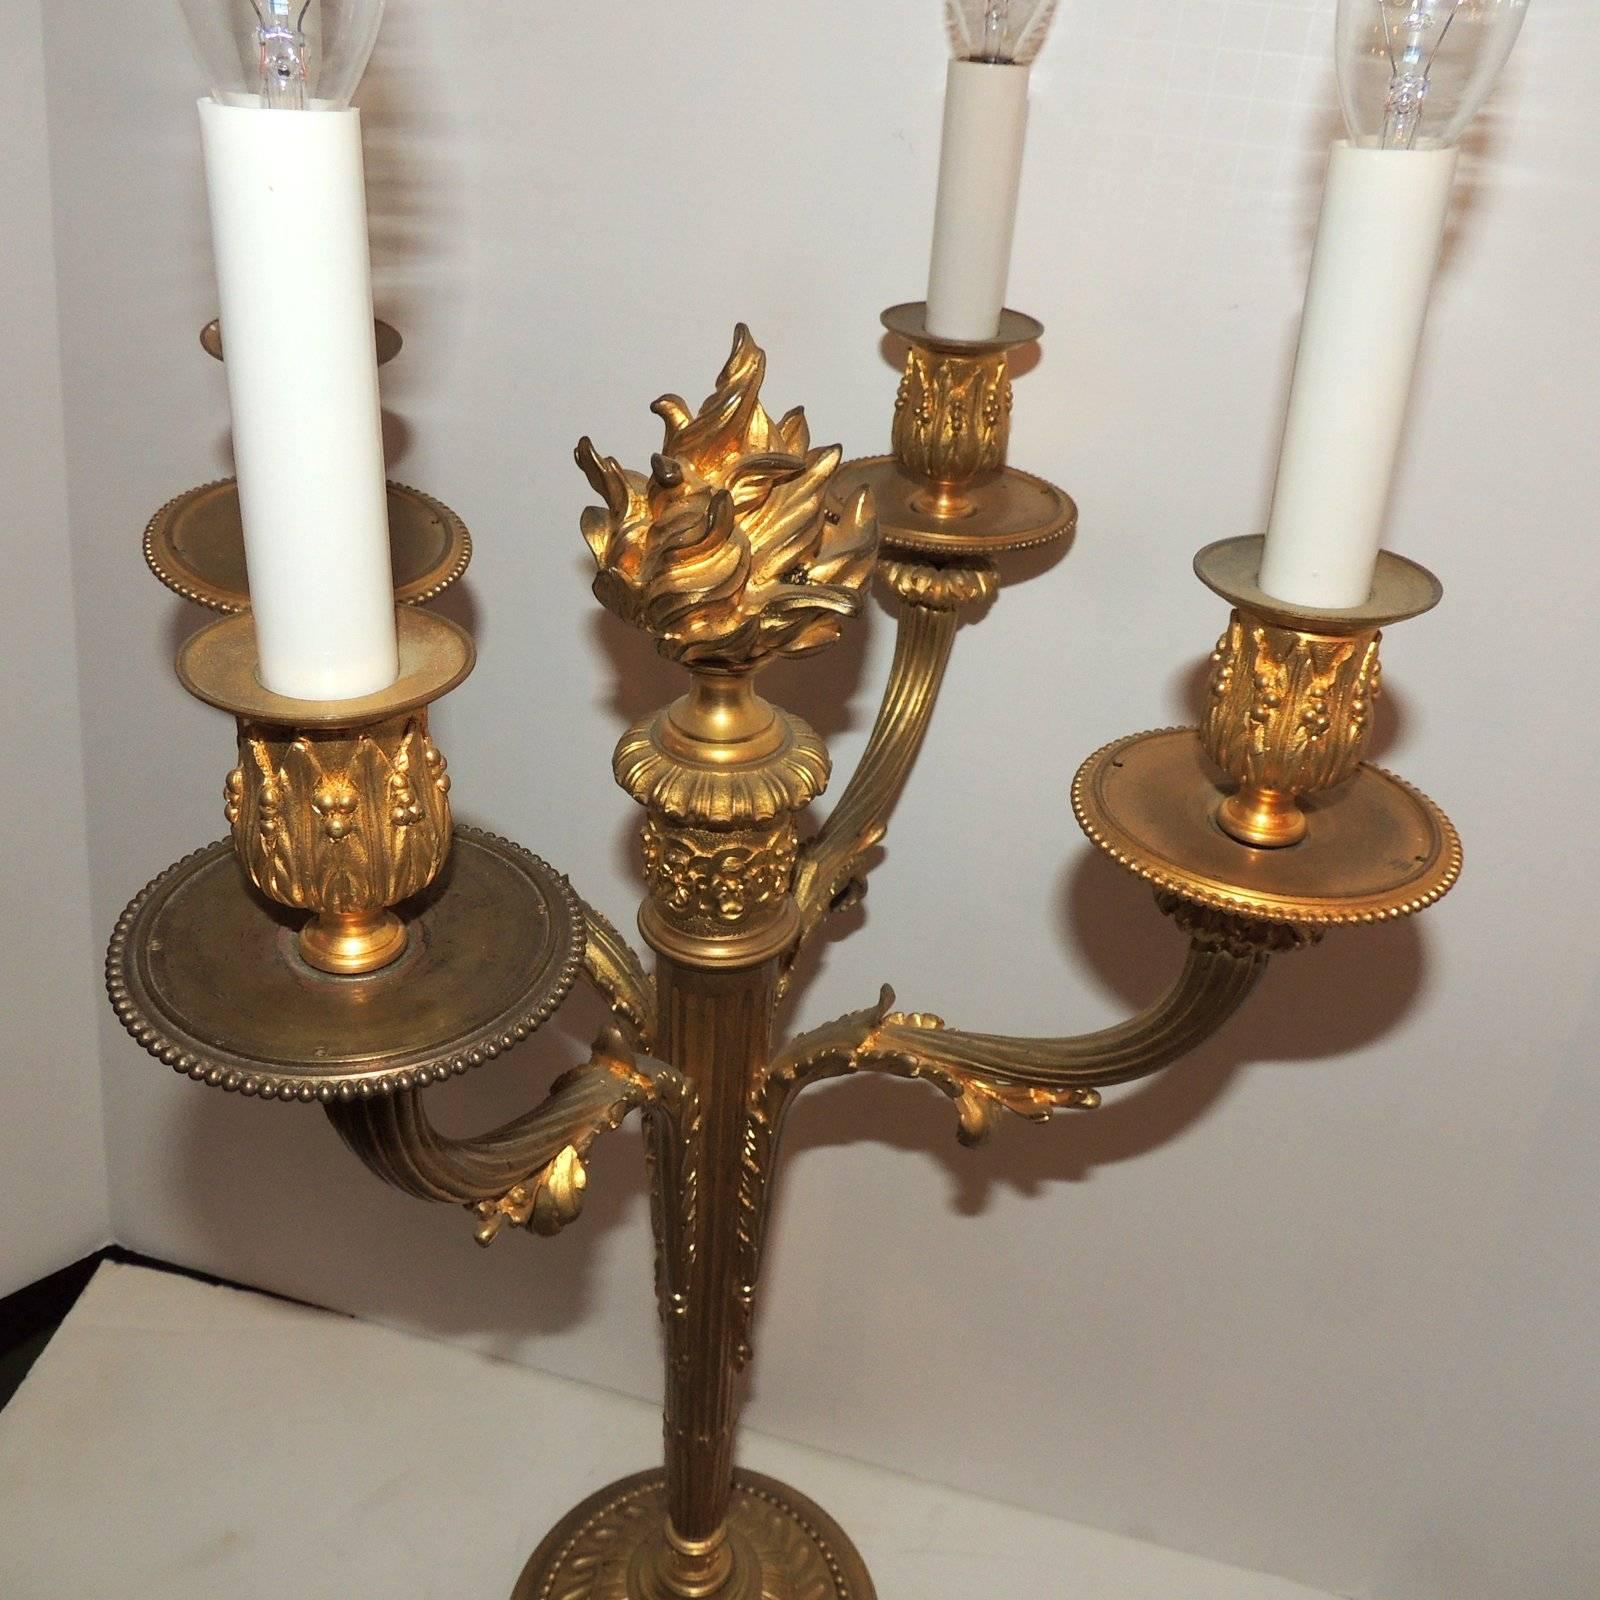 Wonderful Pair French Neoclassical Dore Bronze Regency Four-Arm Candelabra Lamps In Good Condition For Sale In Roslyn, NY